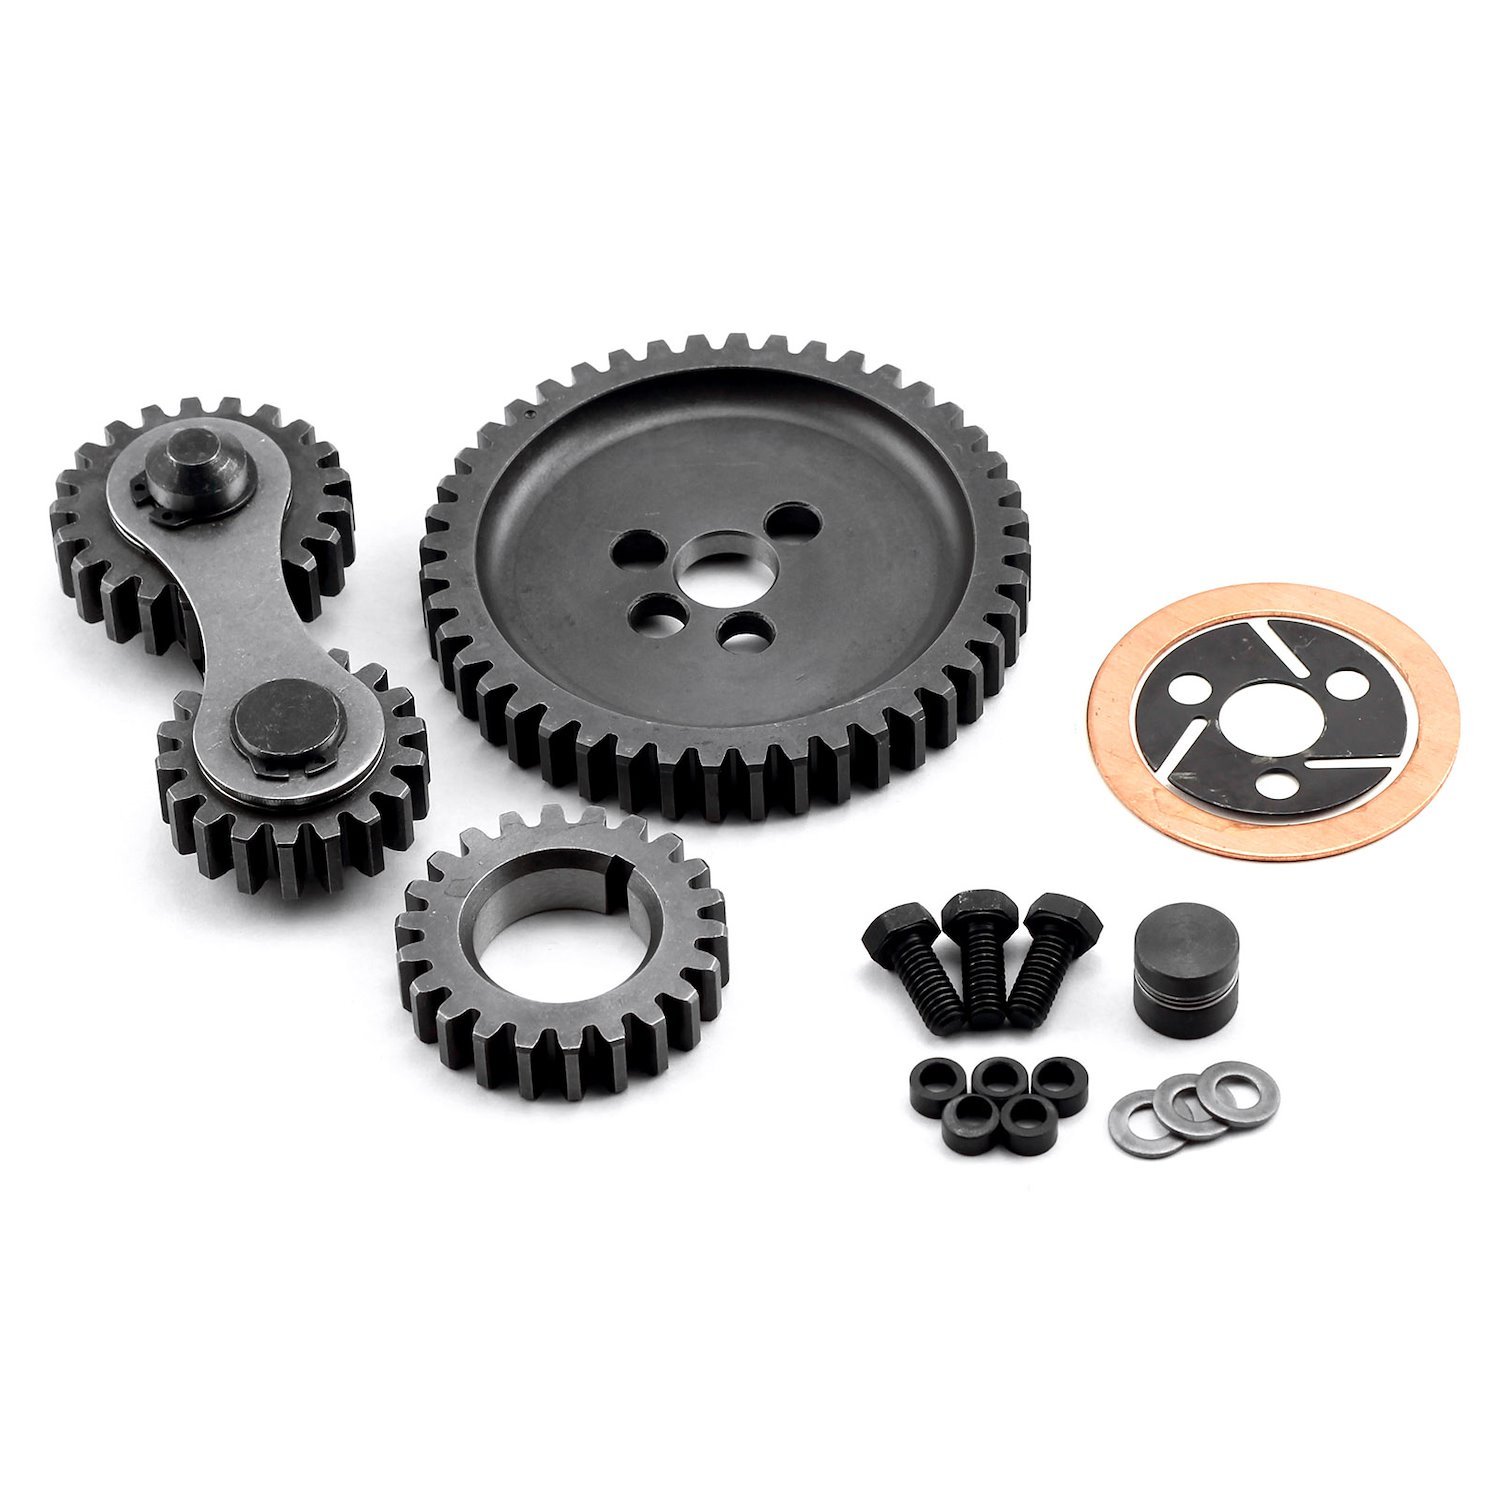 Dual Idler Noisy Timing Gear Drive Set Small Block Chevy 350